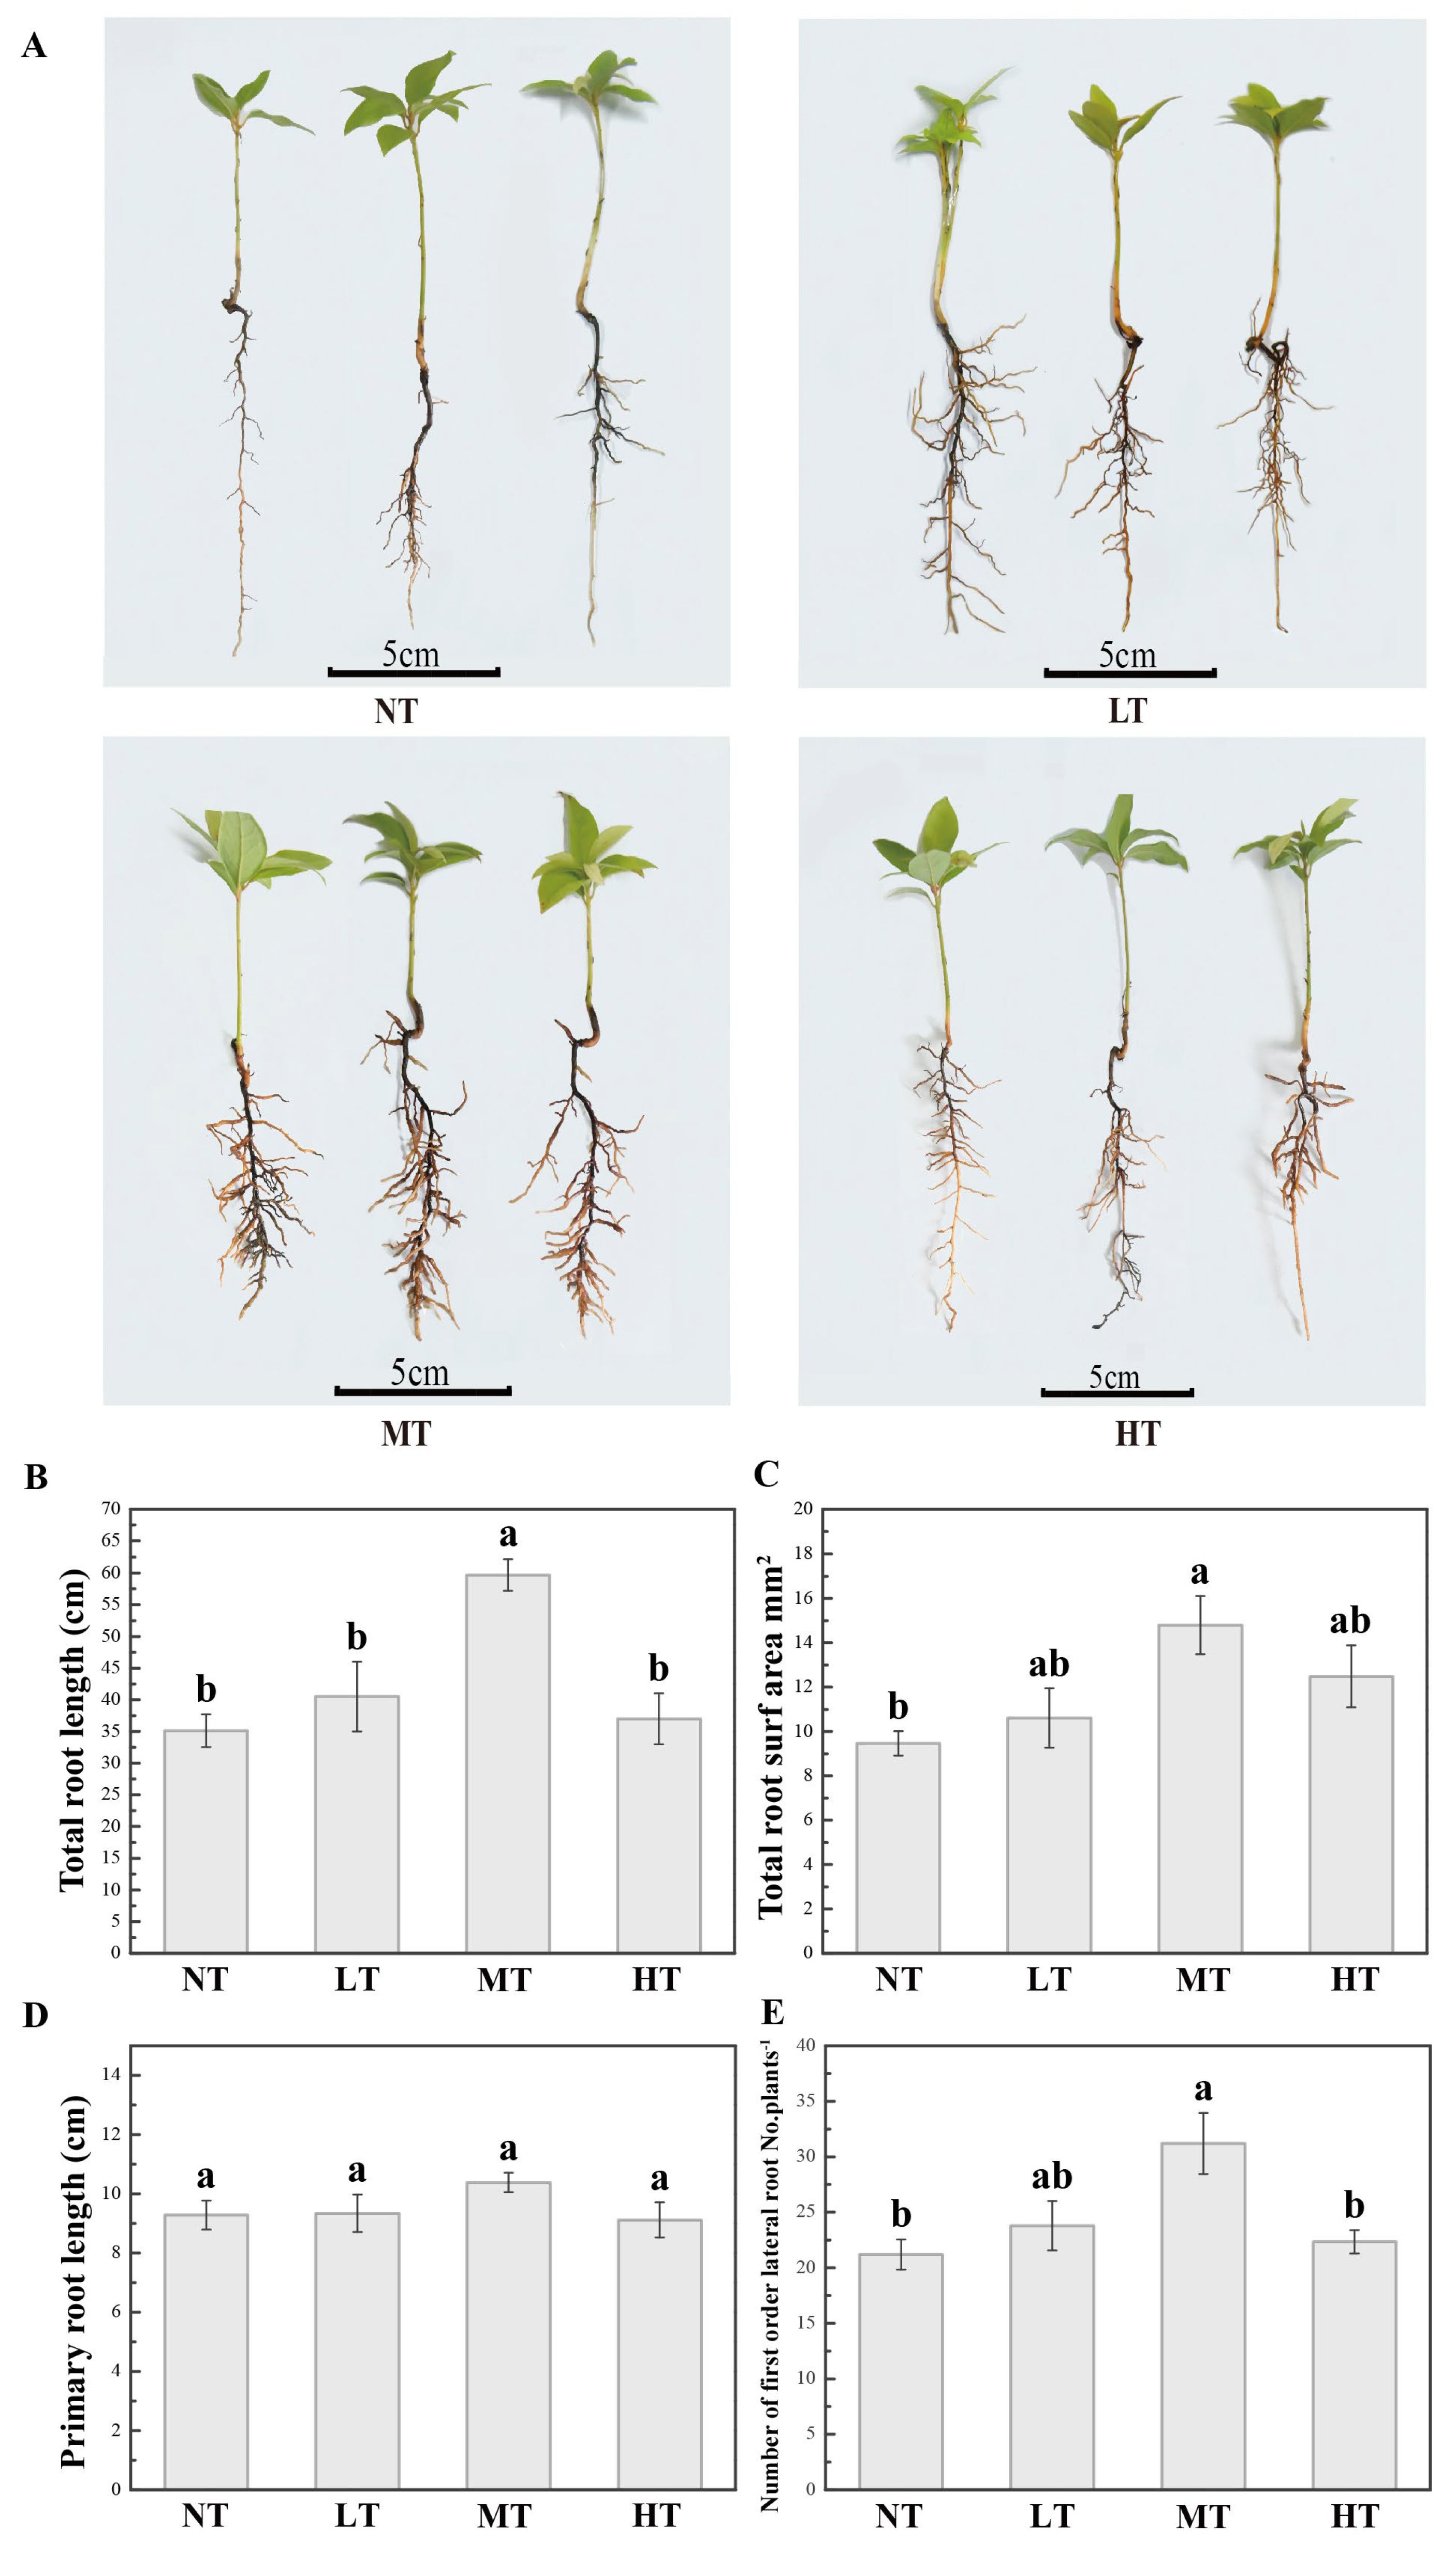 IJMS | Free Full-Text | Paclobutrazol Promotes Root Development of 